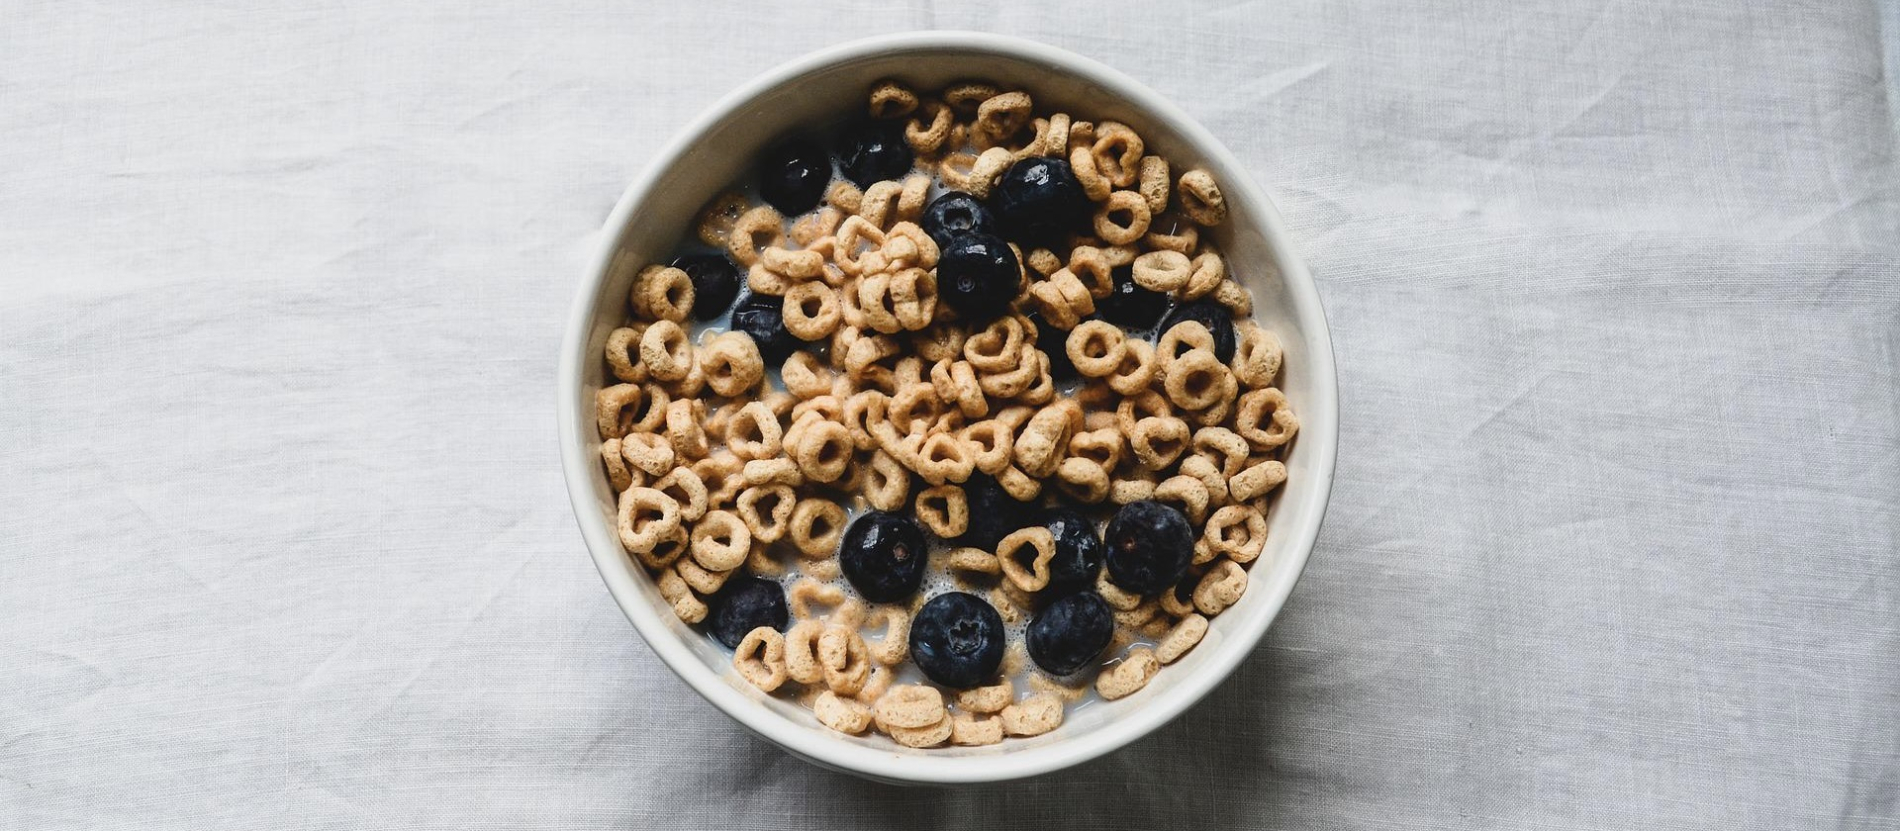 Cheerios, Honey Nut, Frosted Flakes; Which one to choose? - McGill  University